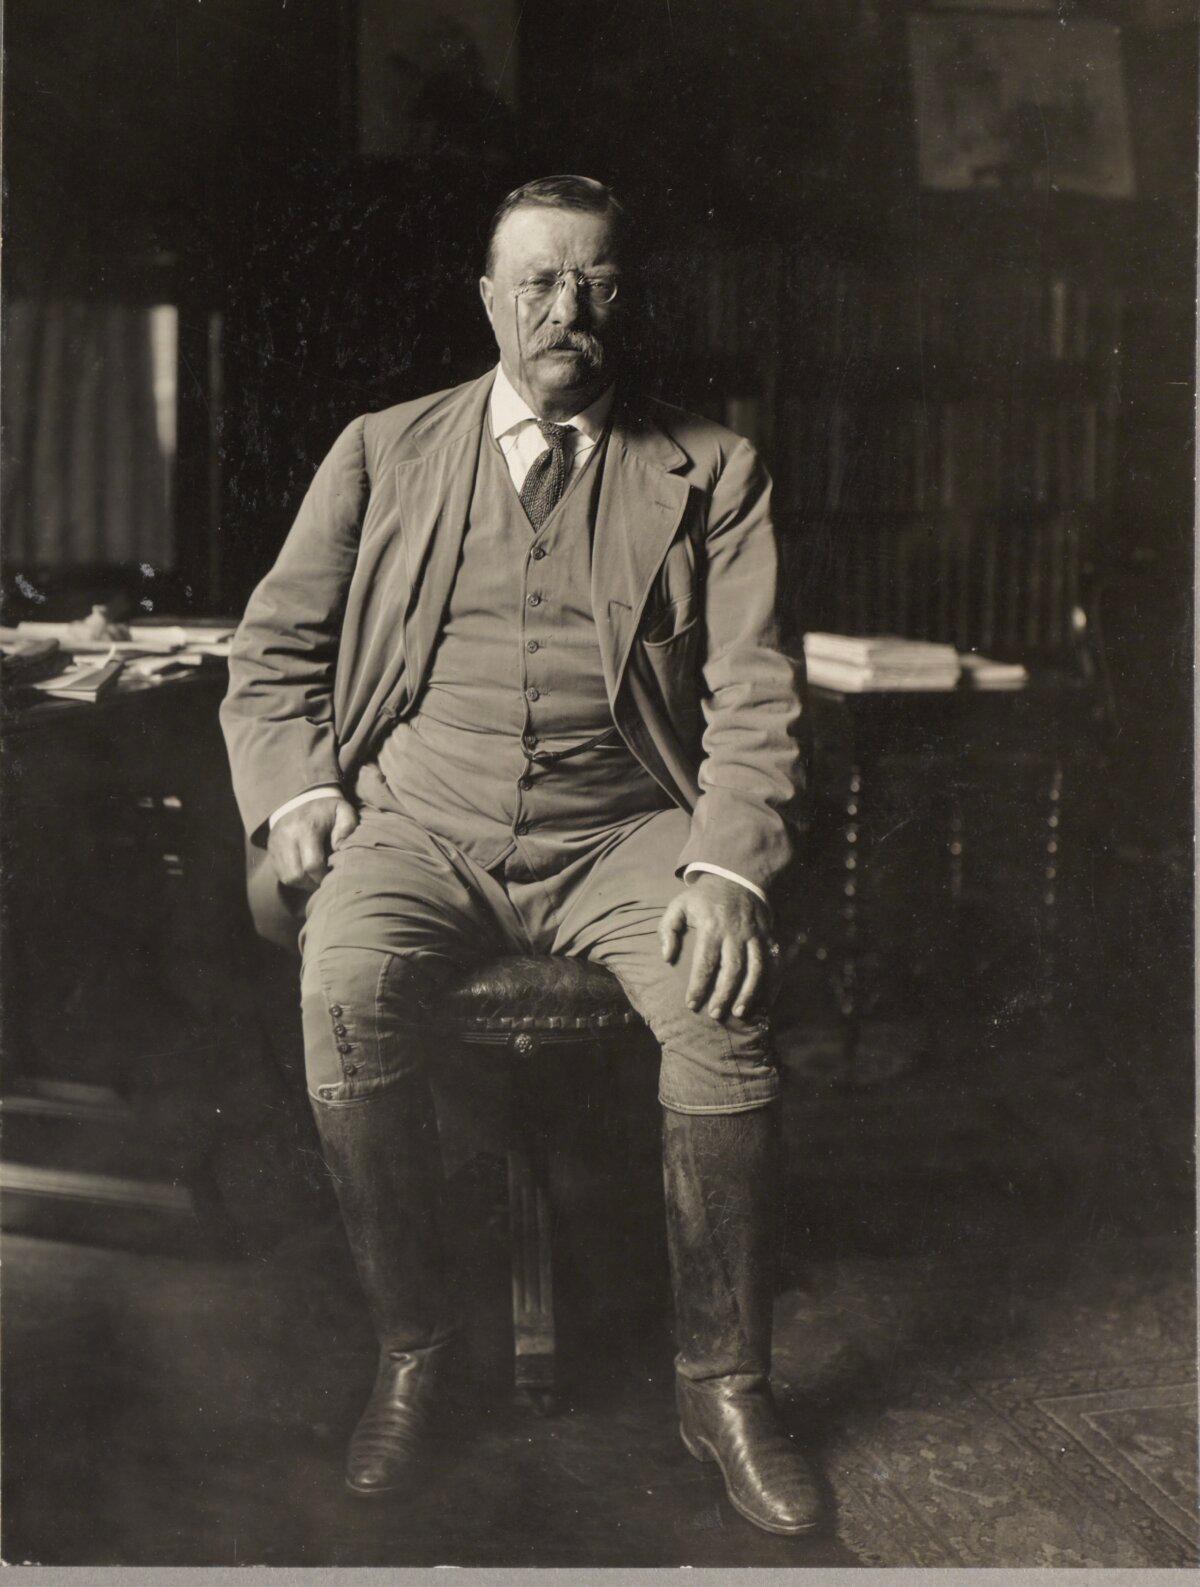 Theodore Roosevelt in his library at Oyster Bay, N.Y., circa 1912. (Public Domain)